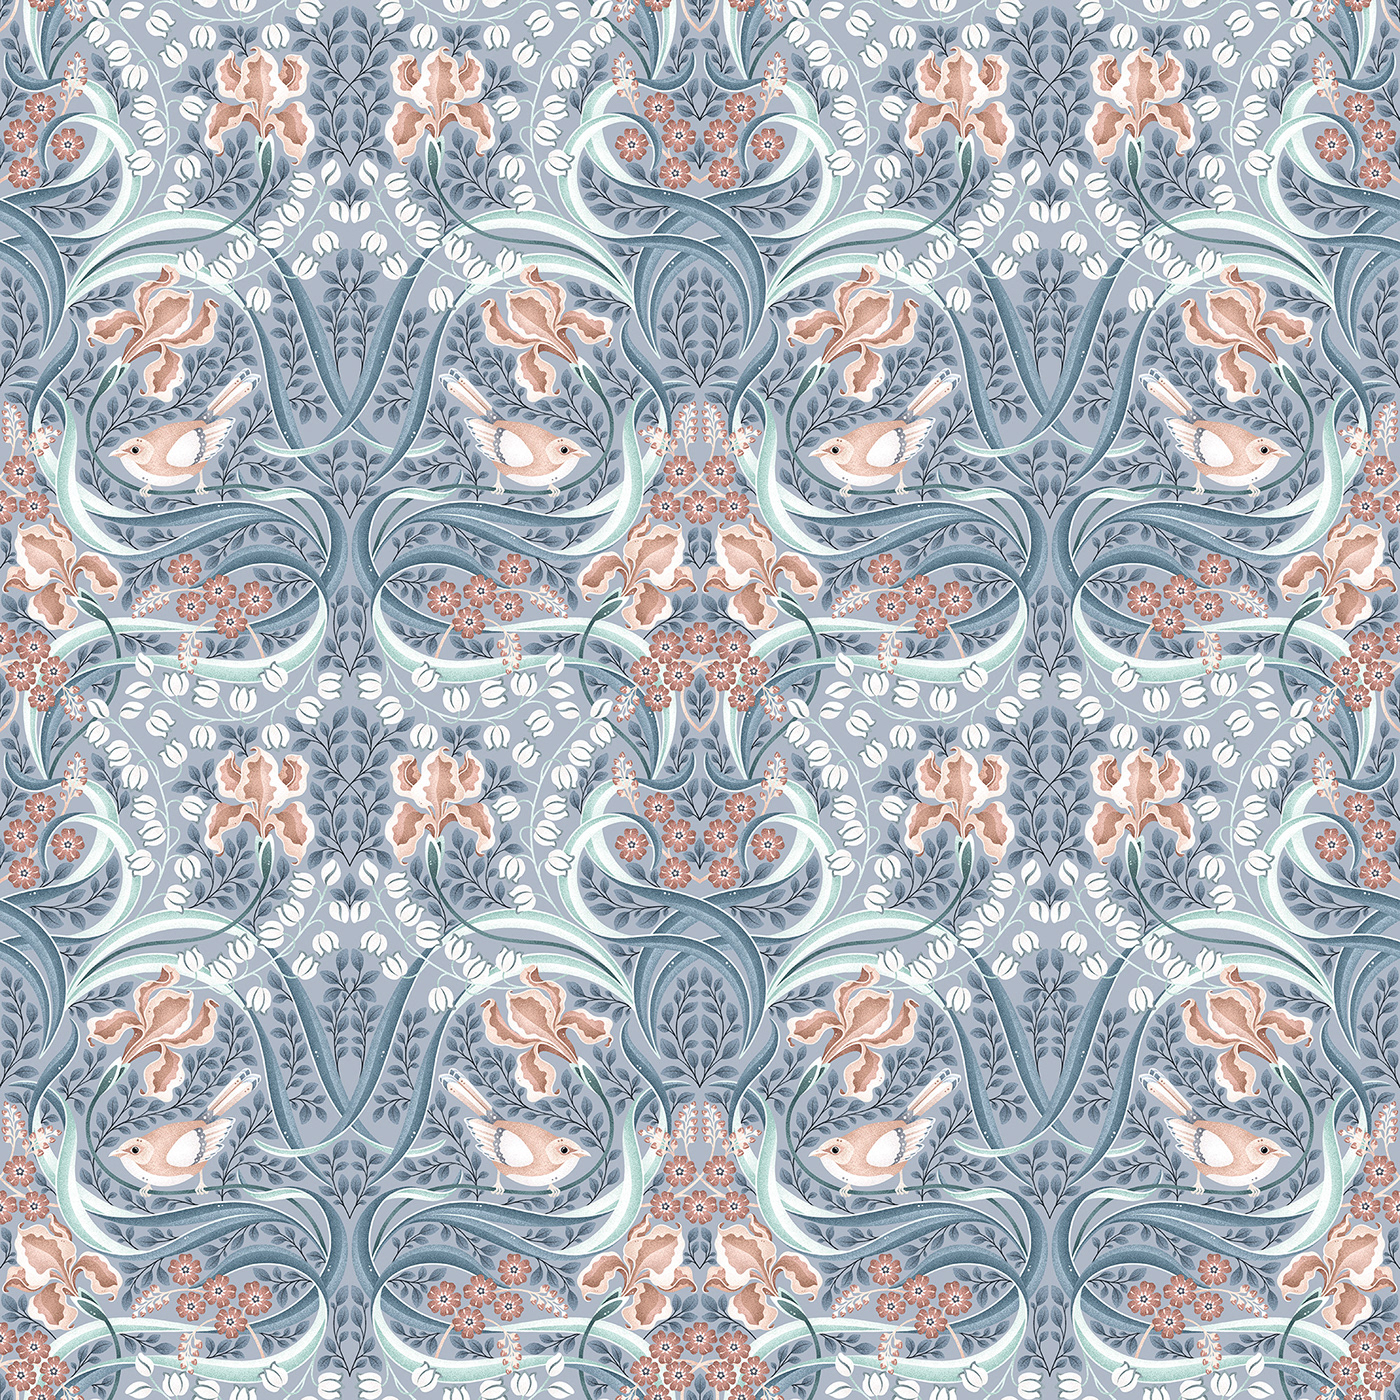 Seamless pattern design featuring bellbirds, lilies of the valley, forget-me-not and iris flowers.